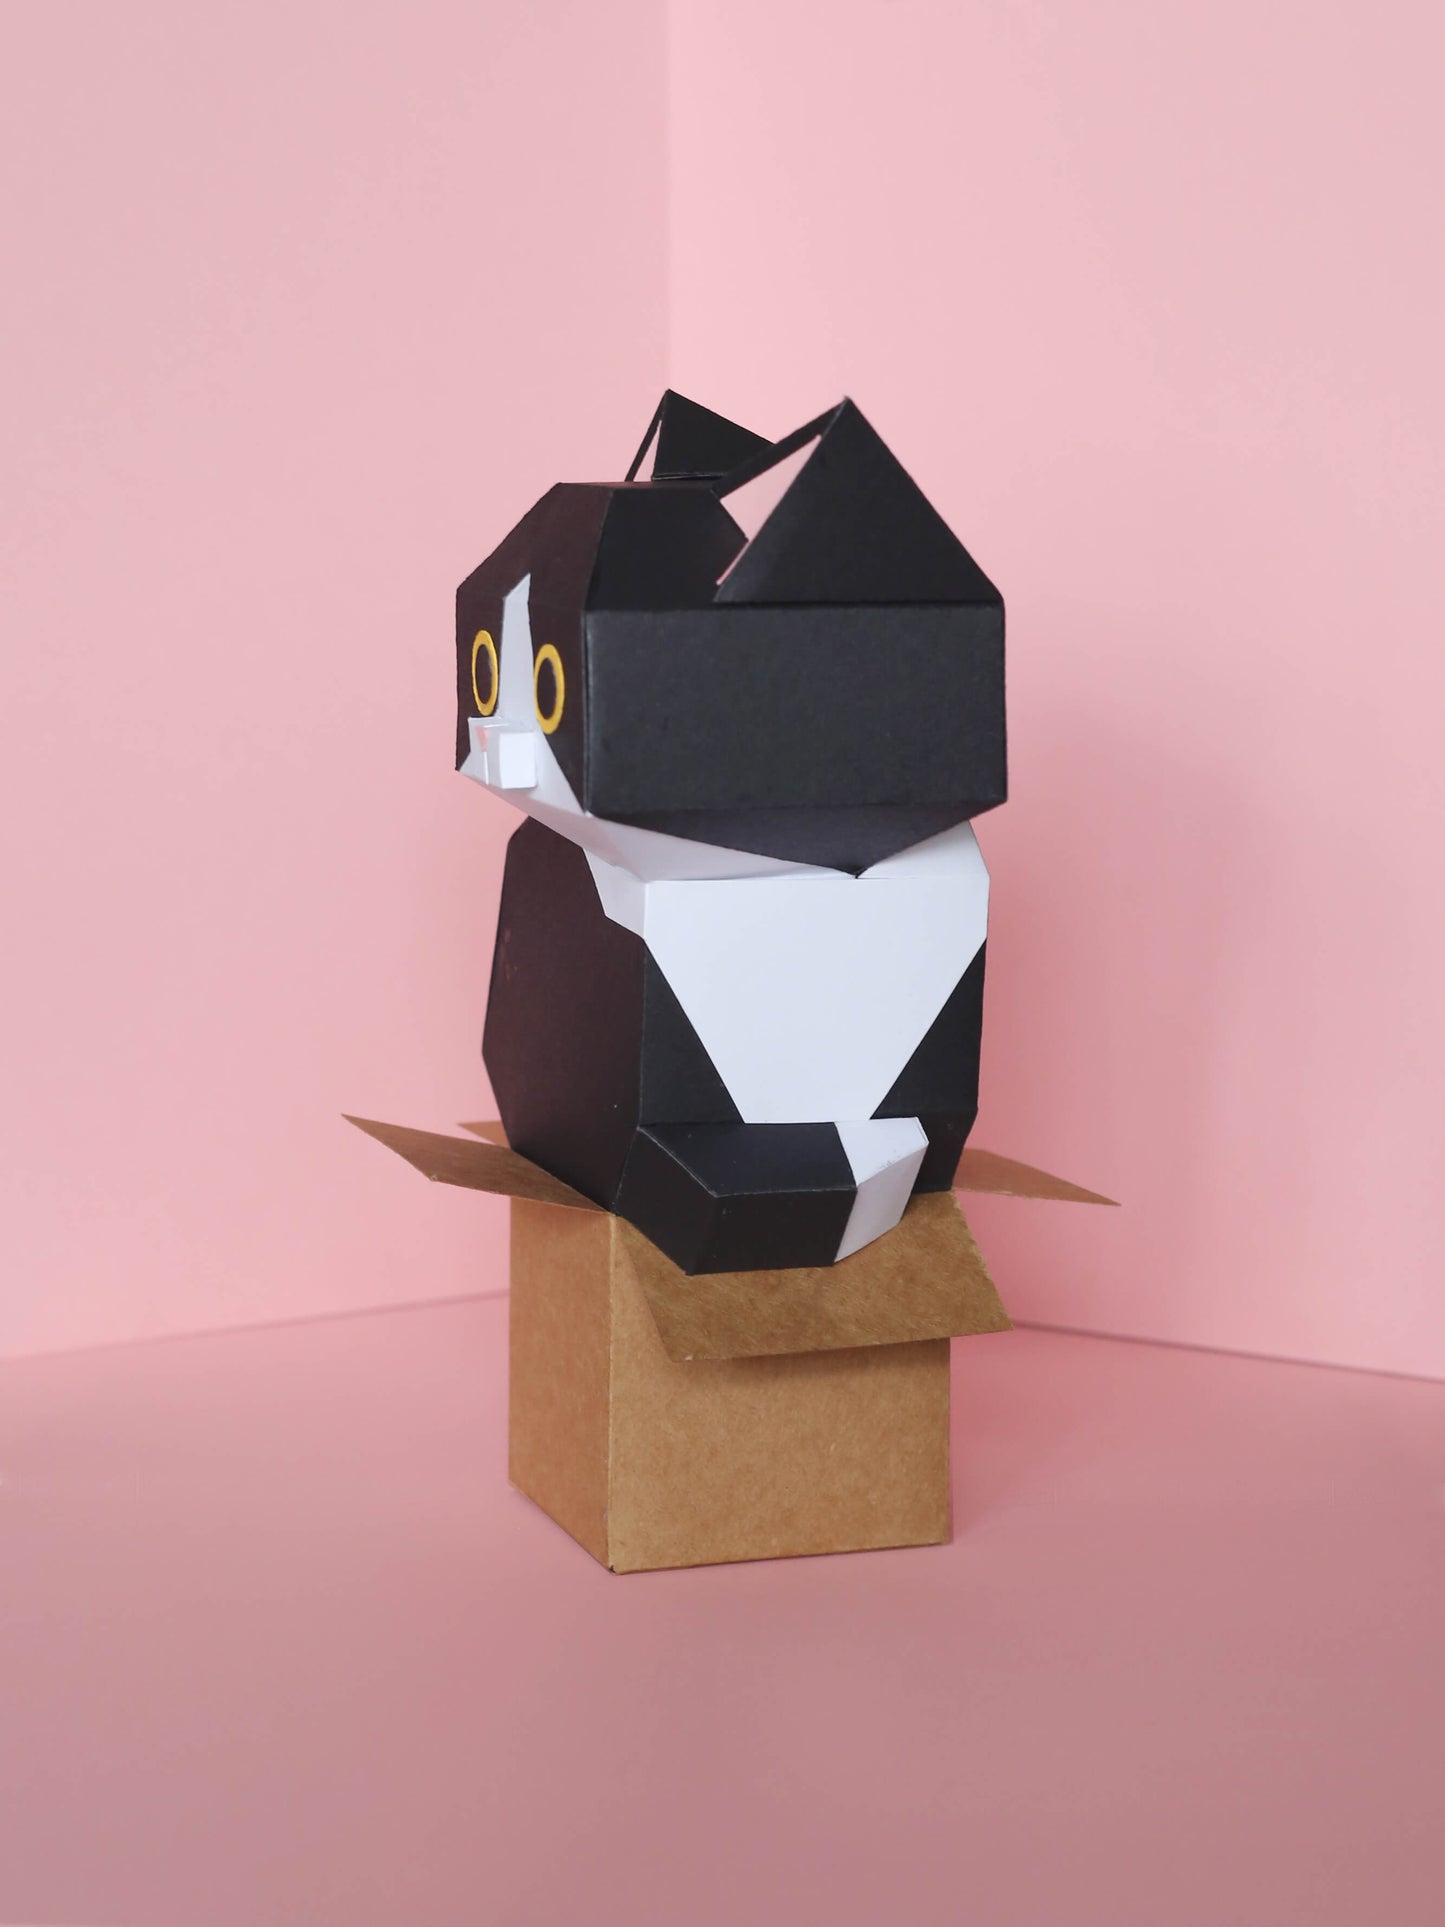 papercraft cat in box, an adorable DIY gift or for home decor, made from Digital Template